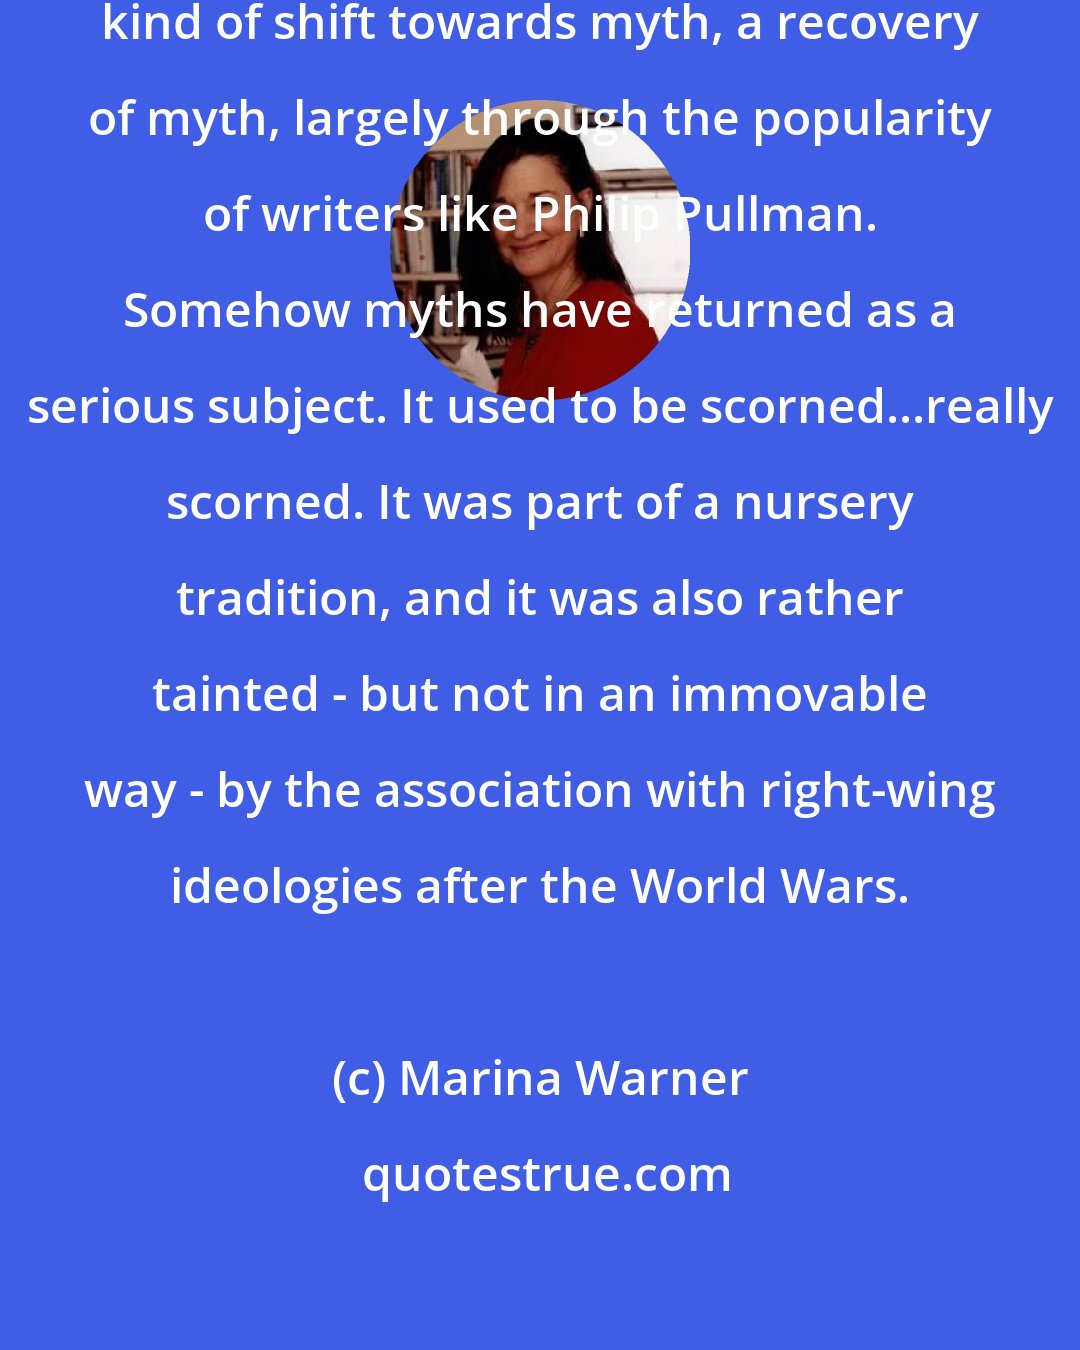 Marina Warner: I do think that this represents a kind of shift towards myth, a recovery of myth, largely through the popularity of writers like Philip Pullman. Somehow myths have returned as a serious subject. It used to be scorned...really scorned. It was part of a nursery tradition, and it was also rather tainted - but not in an immovable way - by the association with right-wing ideologies after the World Wars.